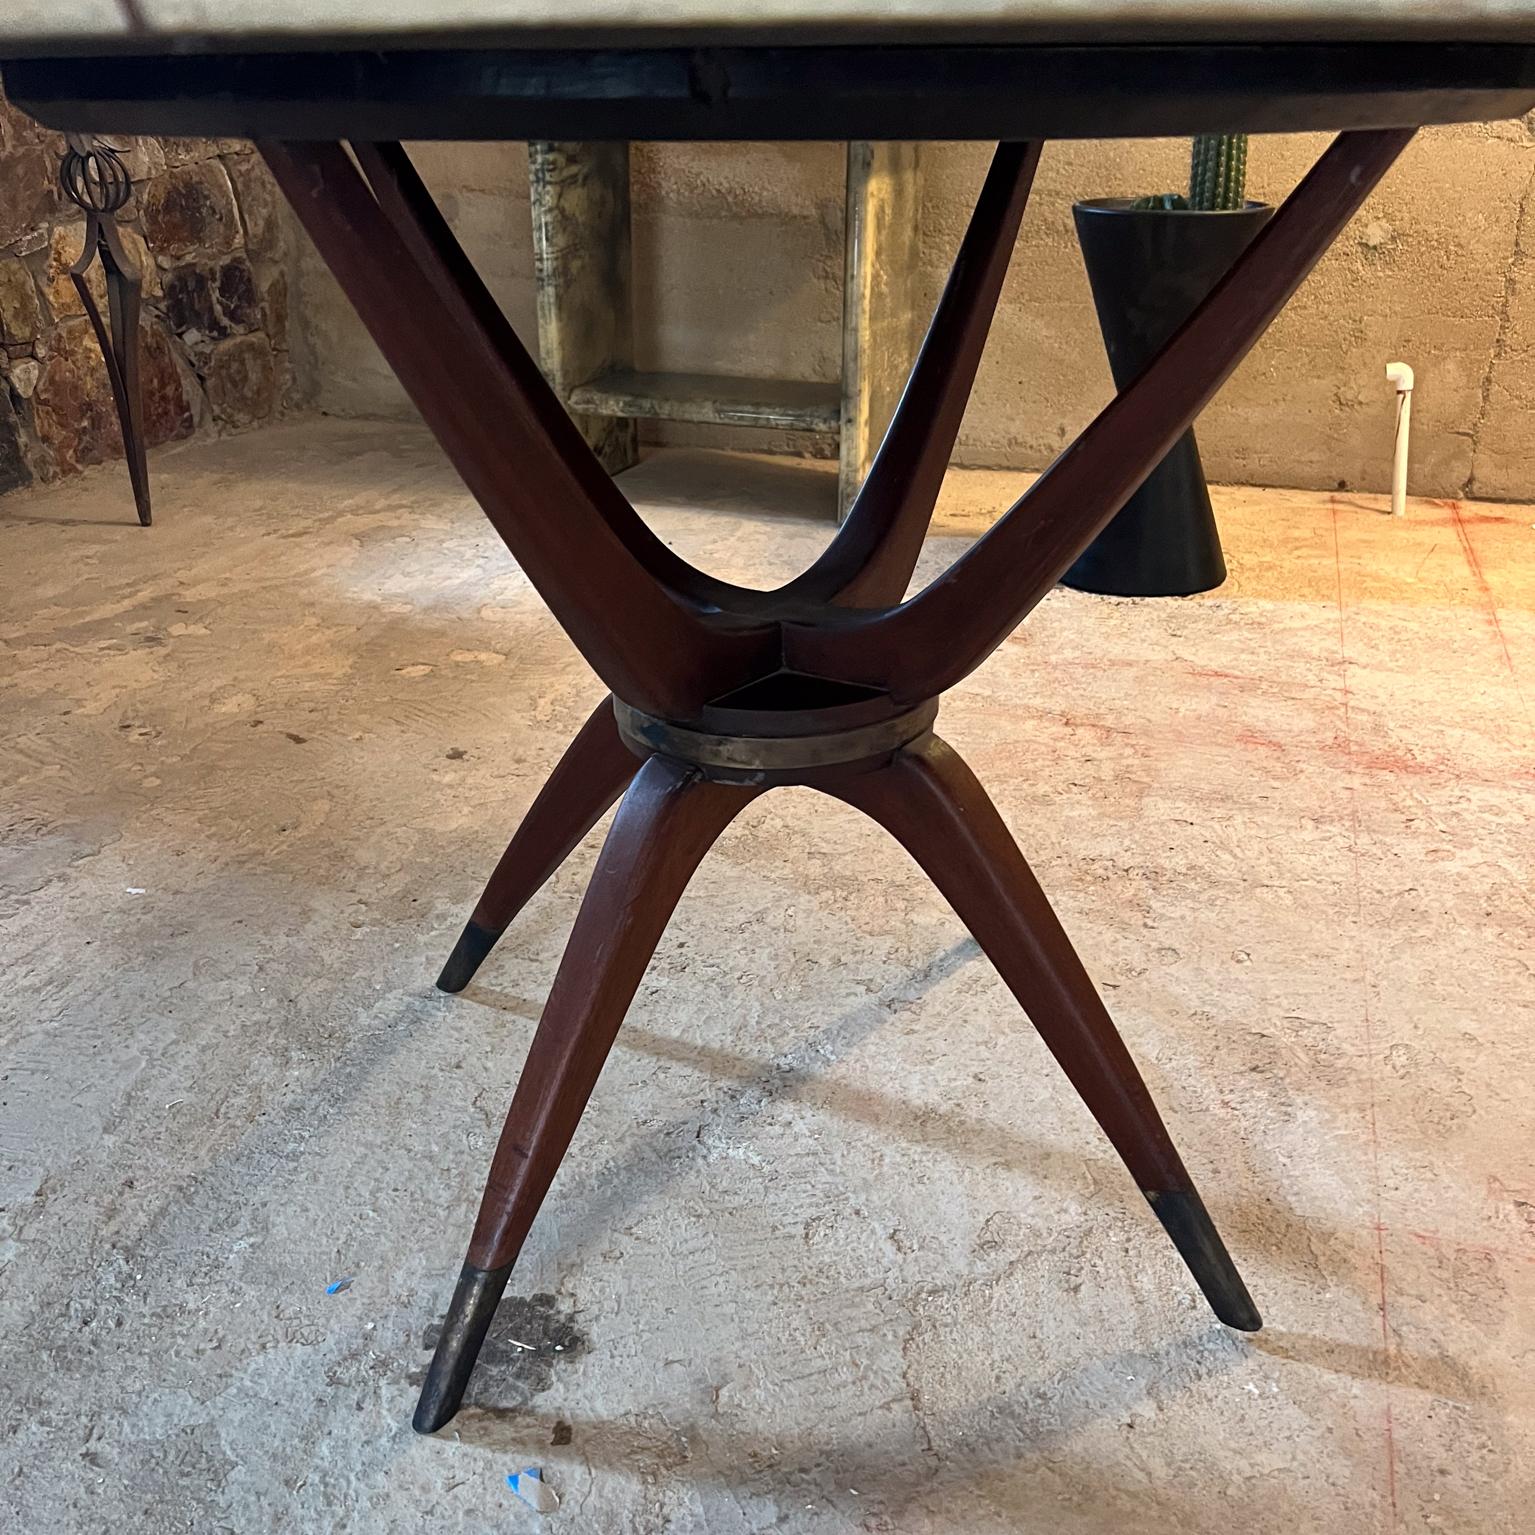 1950s Sculptural Pani Dining Table Goatskin Mahogany & Brass Mexico City For Sale 9